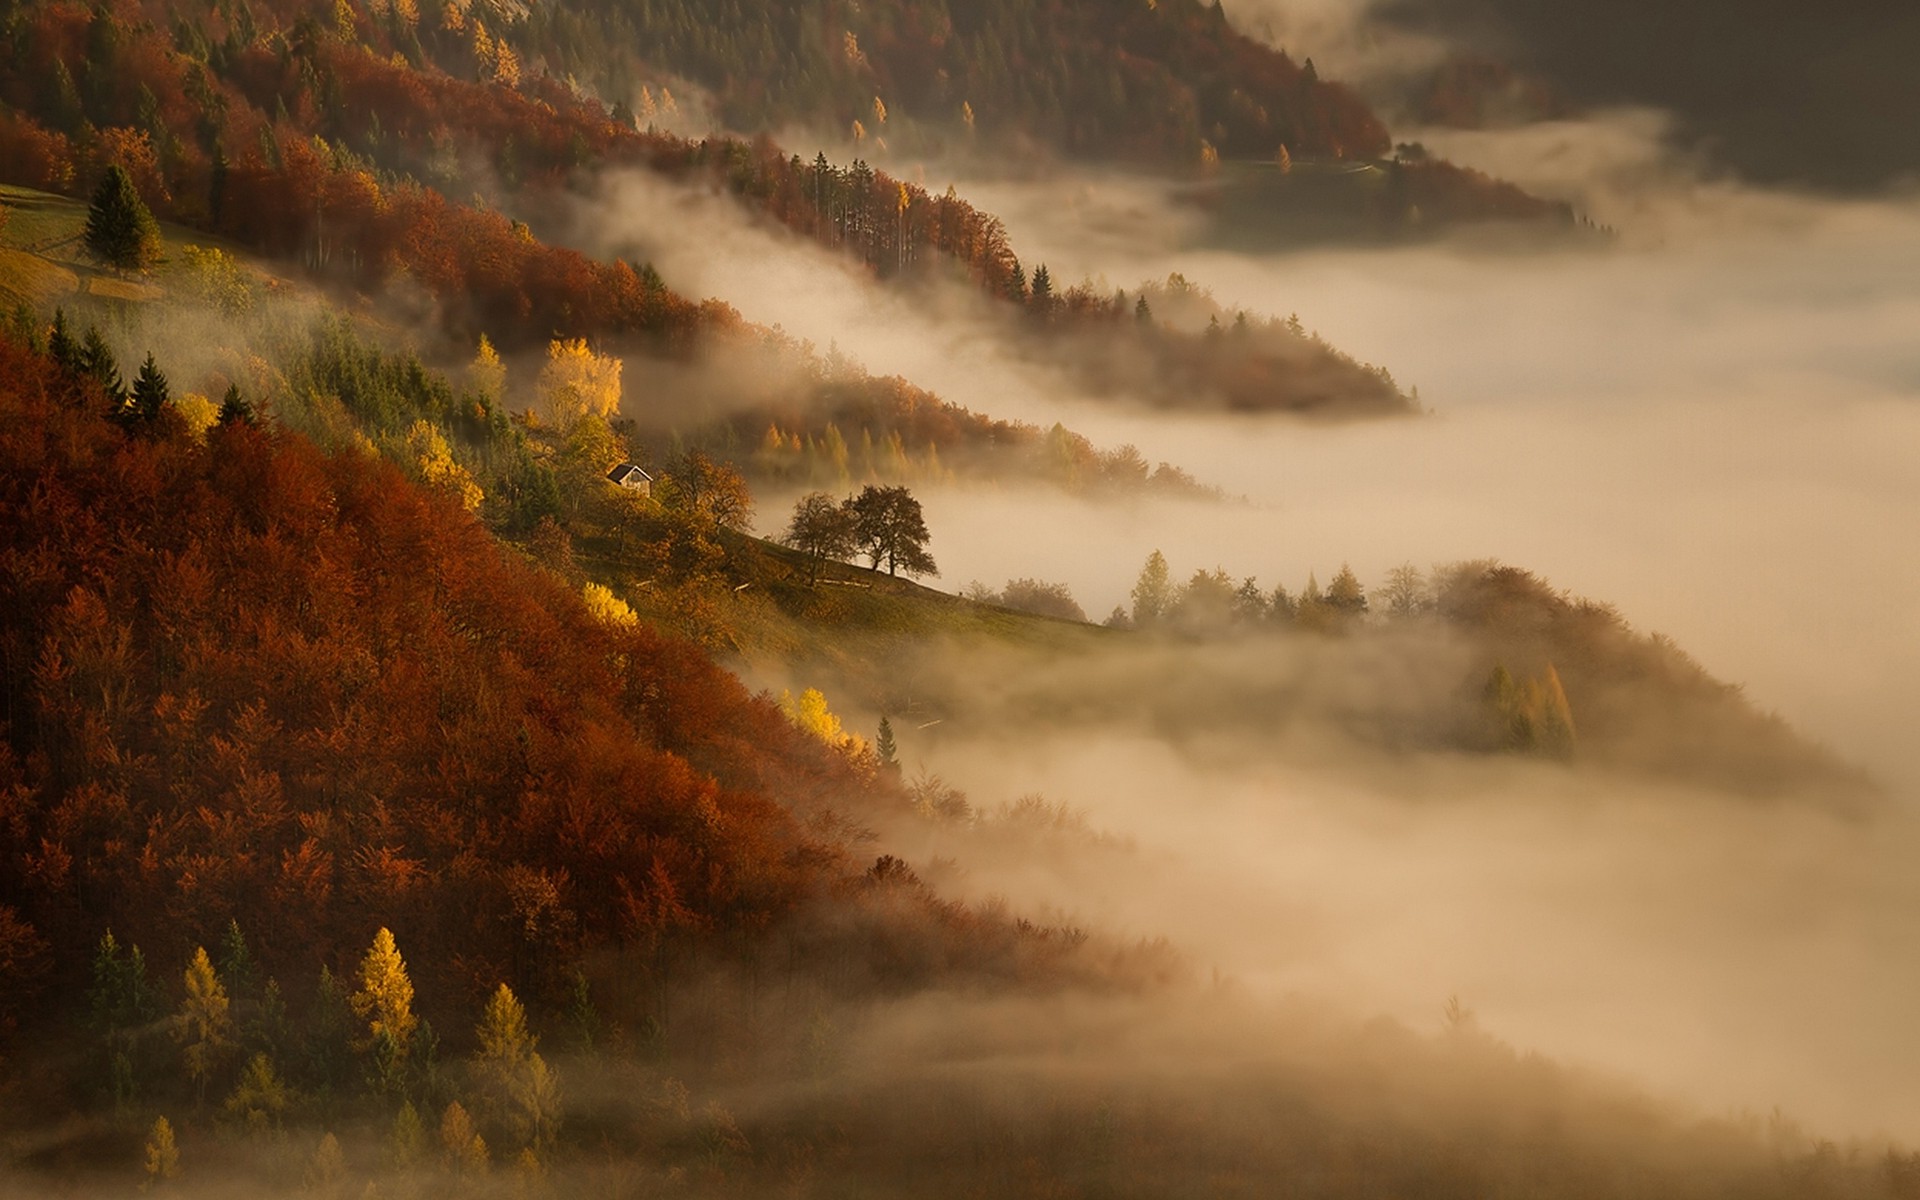 Wallpaper, sunlight, trees, landscape, forest, fall, hill, nature, sky, sunrise, evening, morning, mist, atmosphere, national park, wilderness, cottage, cloud, tree, autumn, fog, mountain, dawn, 1920x1200 px, meteorological phenomenon 1920x1200